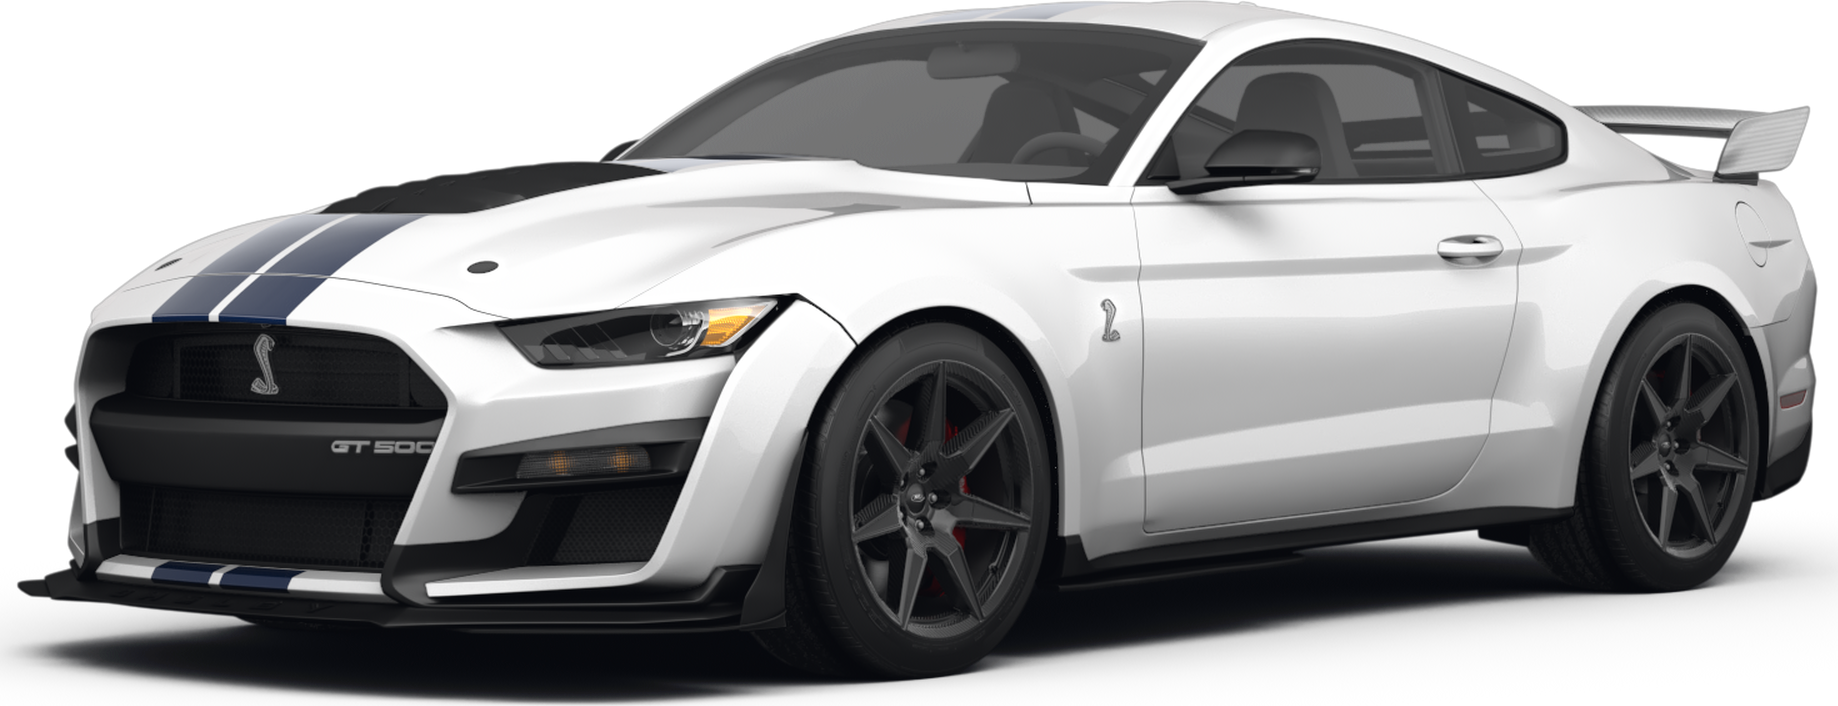 2022 Ford Mustang Shelby GT500 Review, Pricing, and Specs